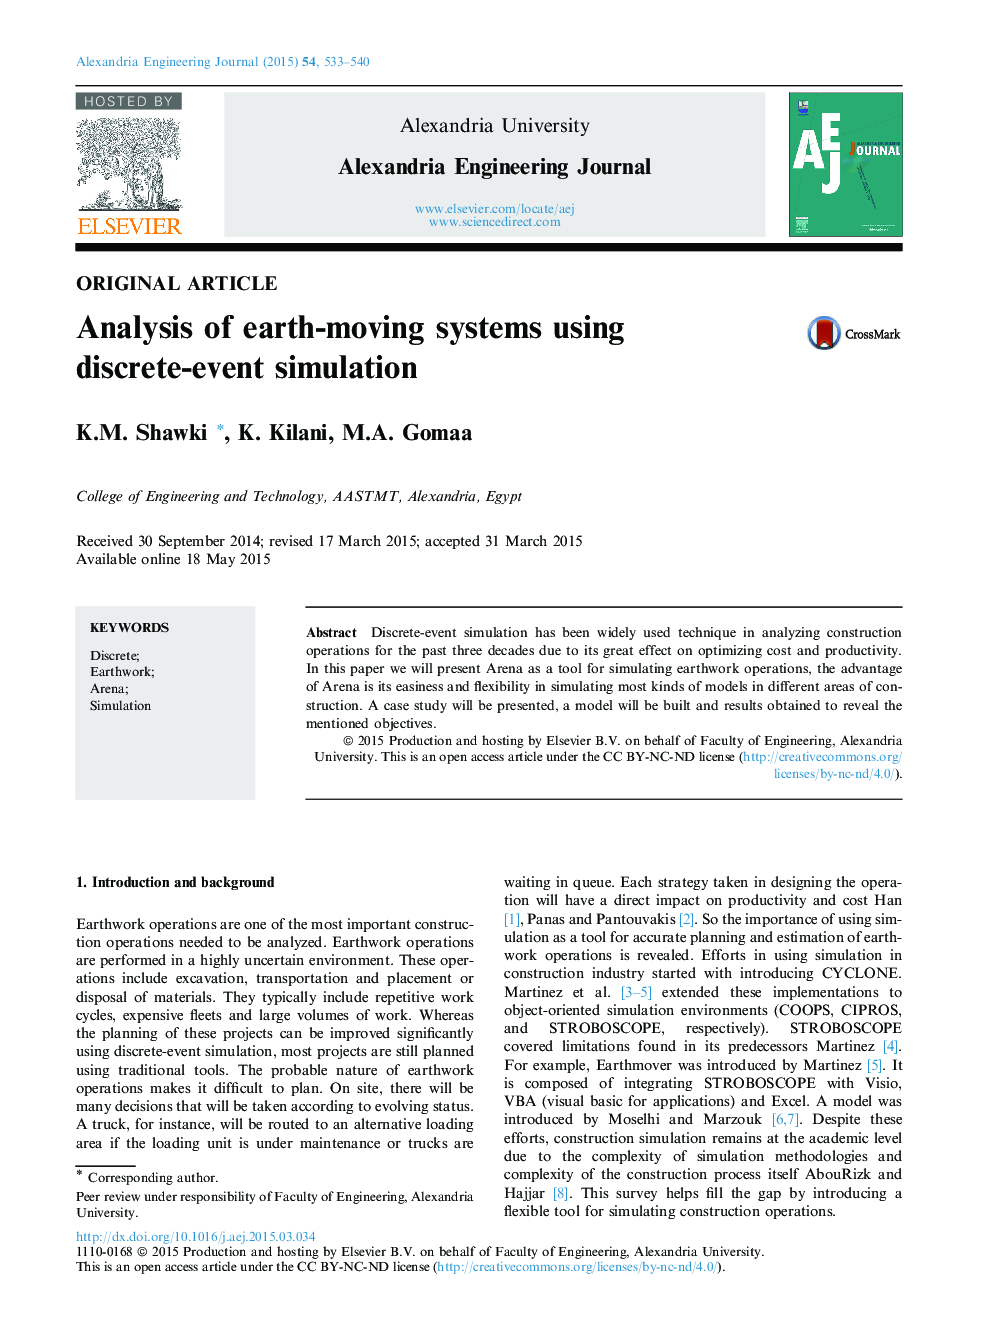 Analysis of earth-moving systems using discrete-event simulation